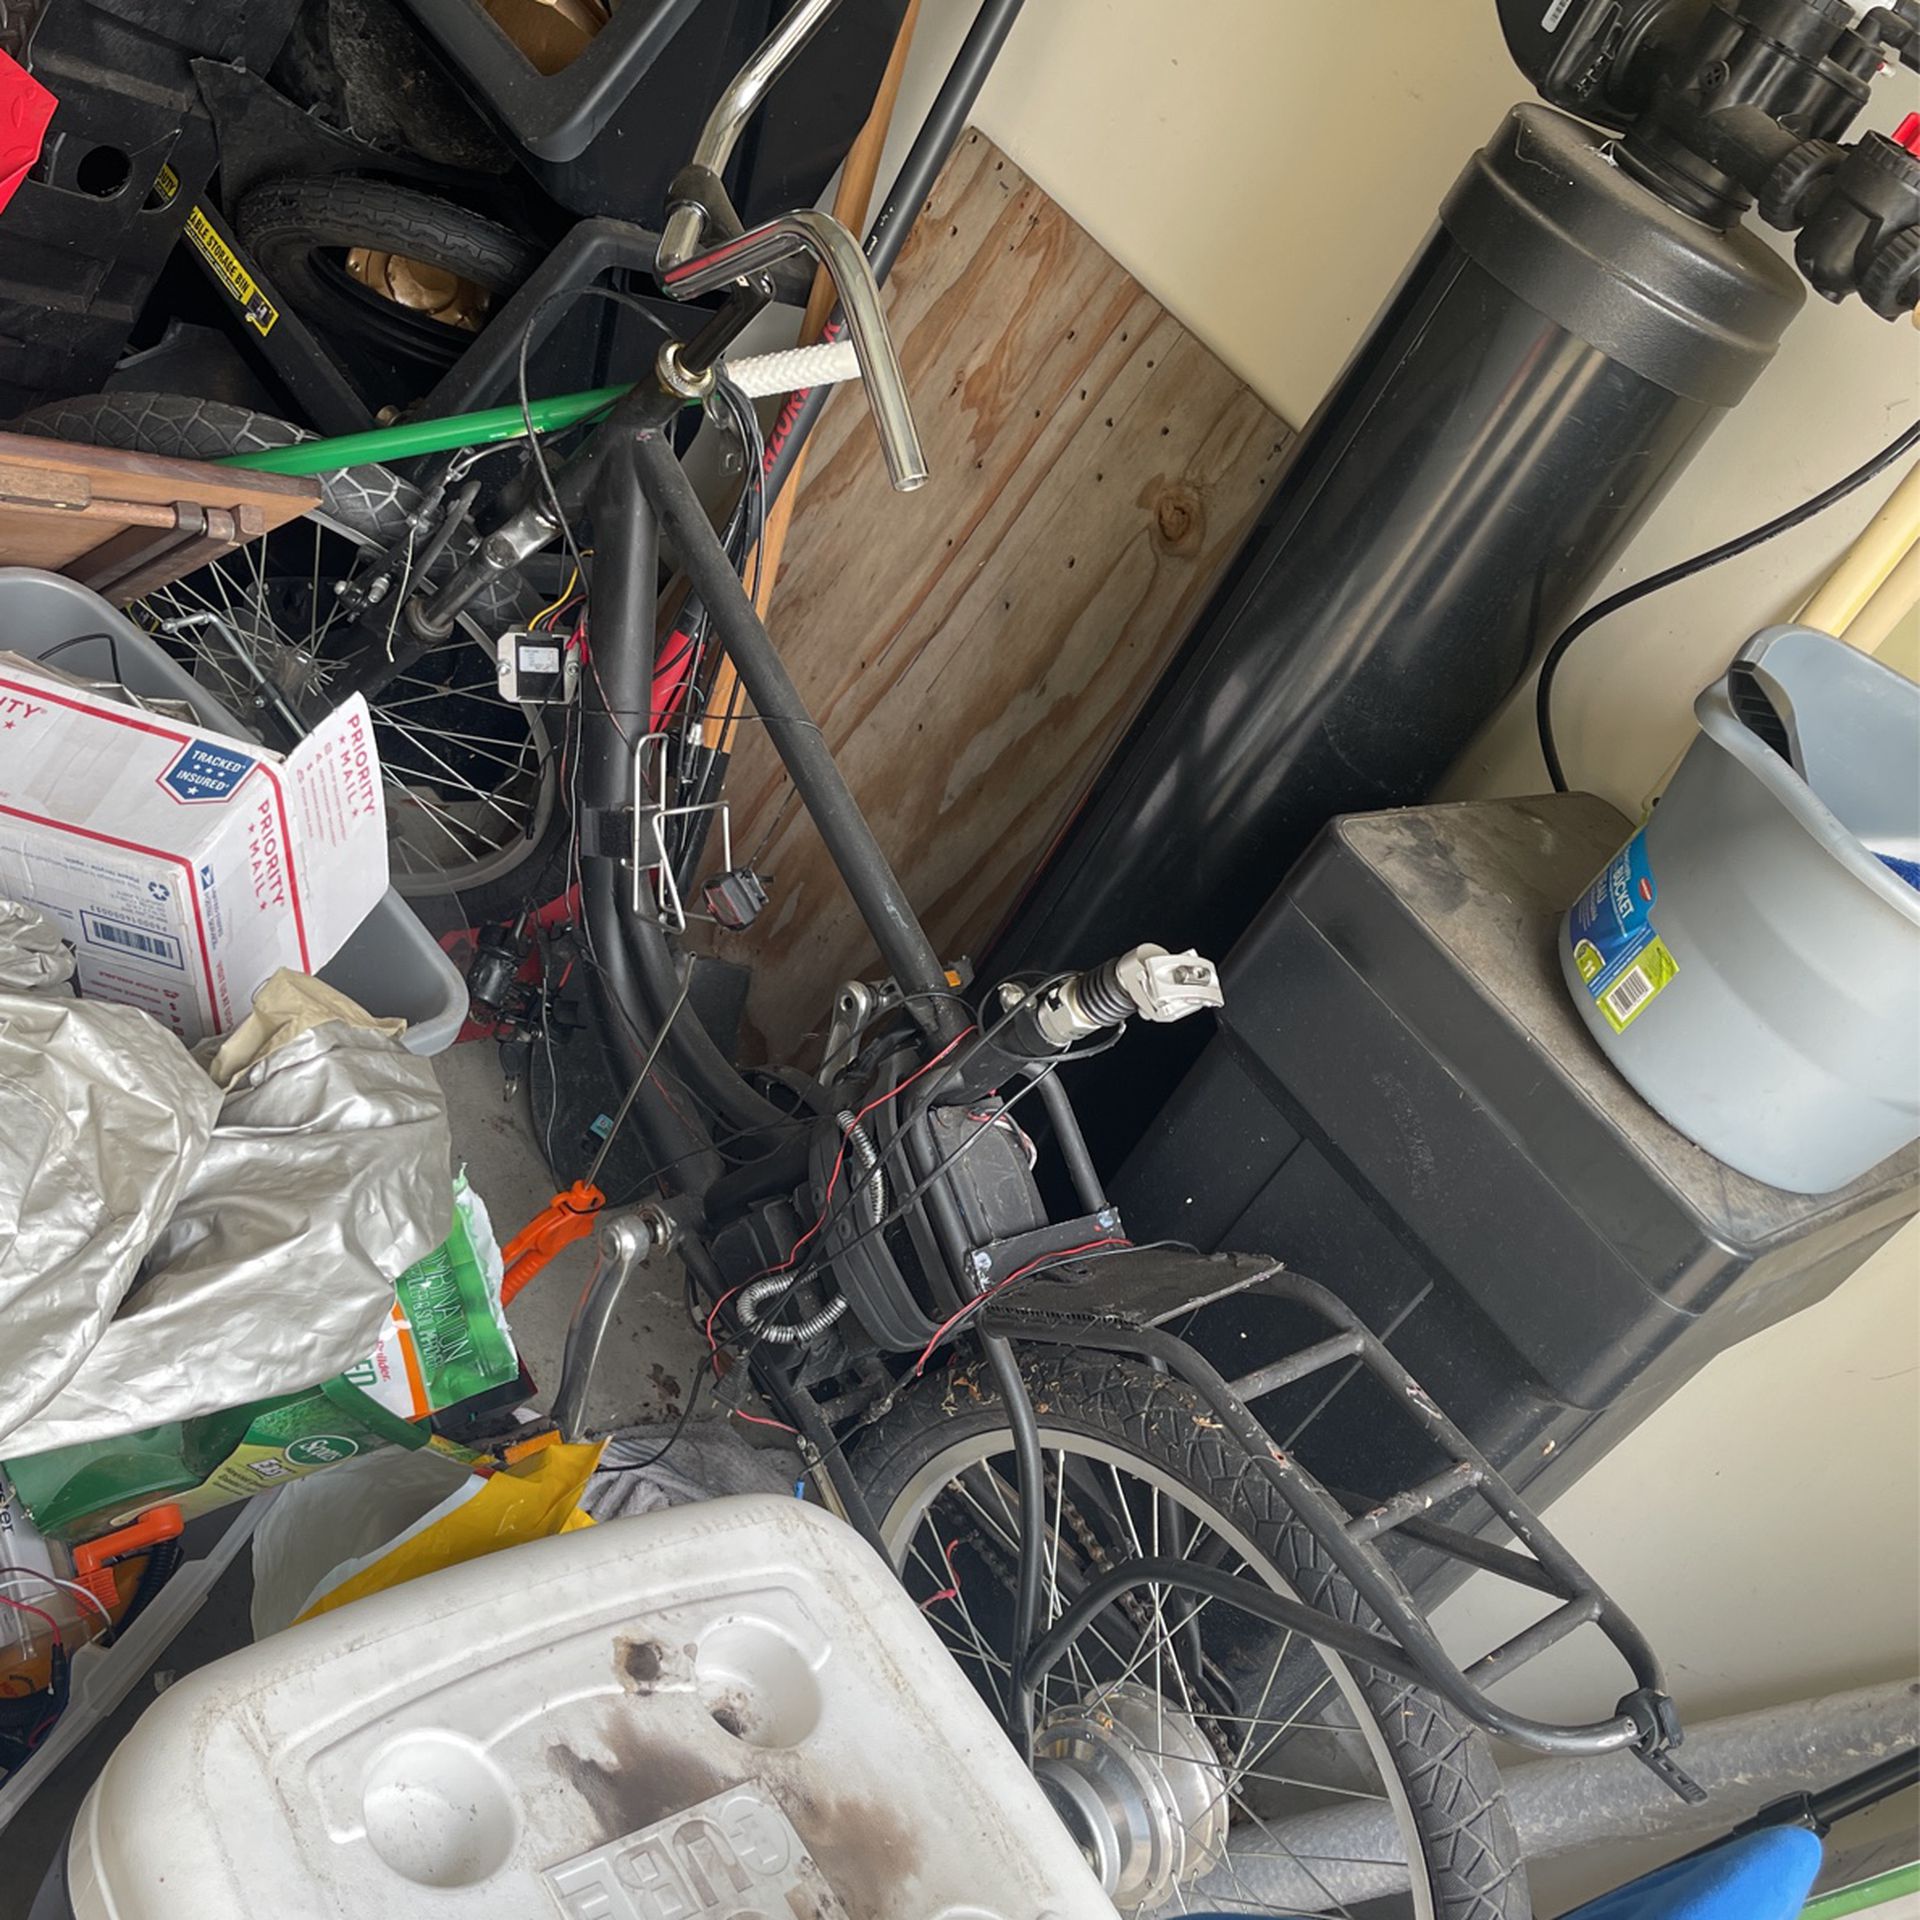 Electric Bike Works But Has Needs